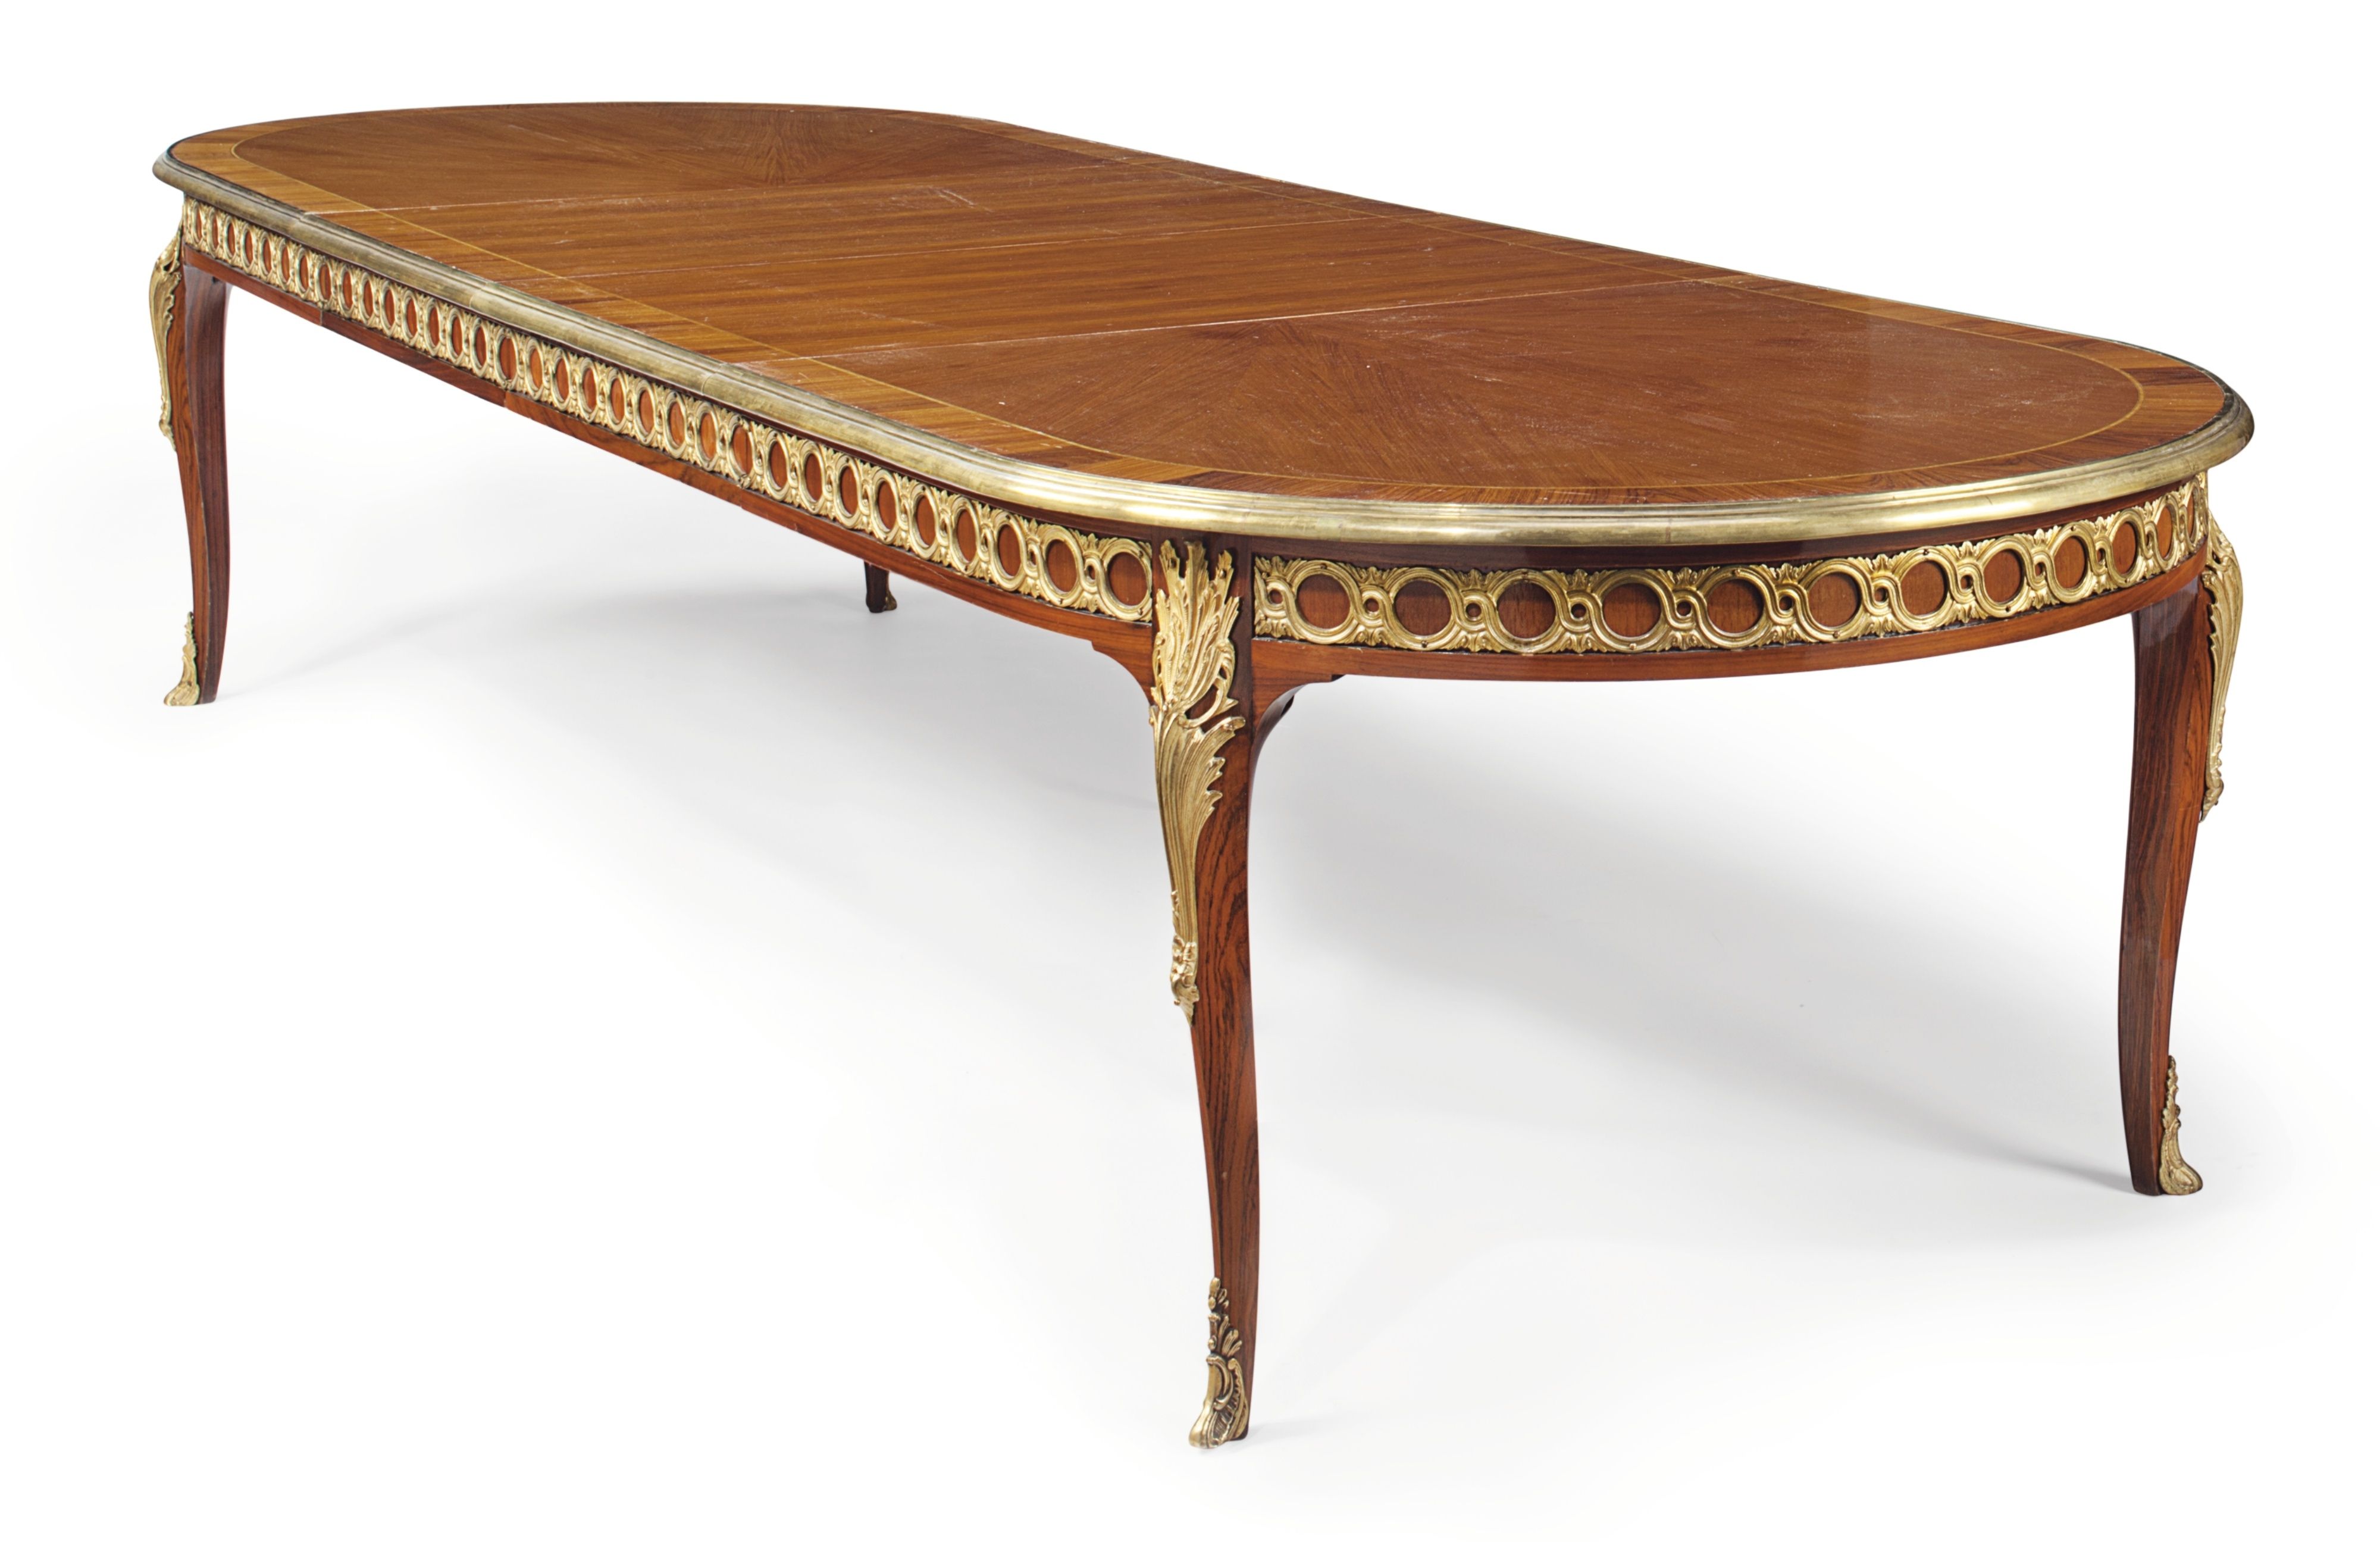 Mahogany Extending Dining Tables And Chairs Within Famous An Ormolu Mounted Tulipwood And Mahogany Extending Dining Table (View 25 of 25)